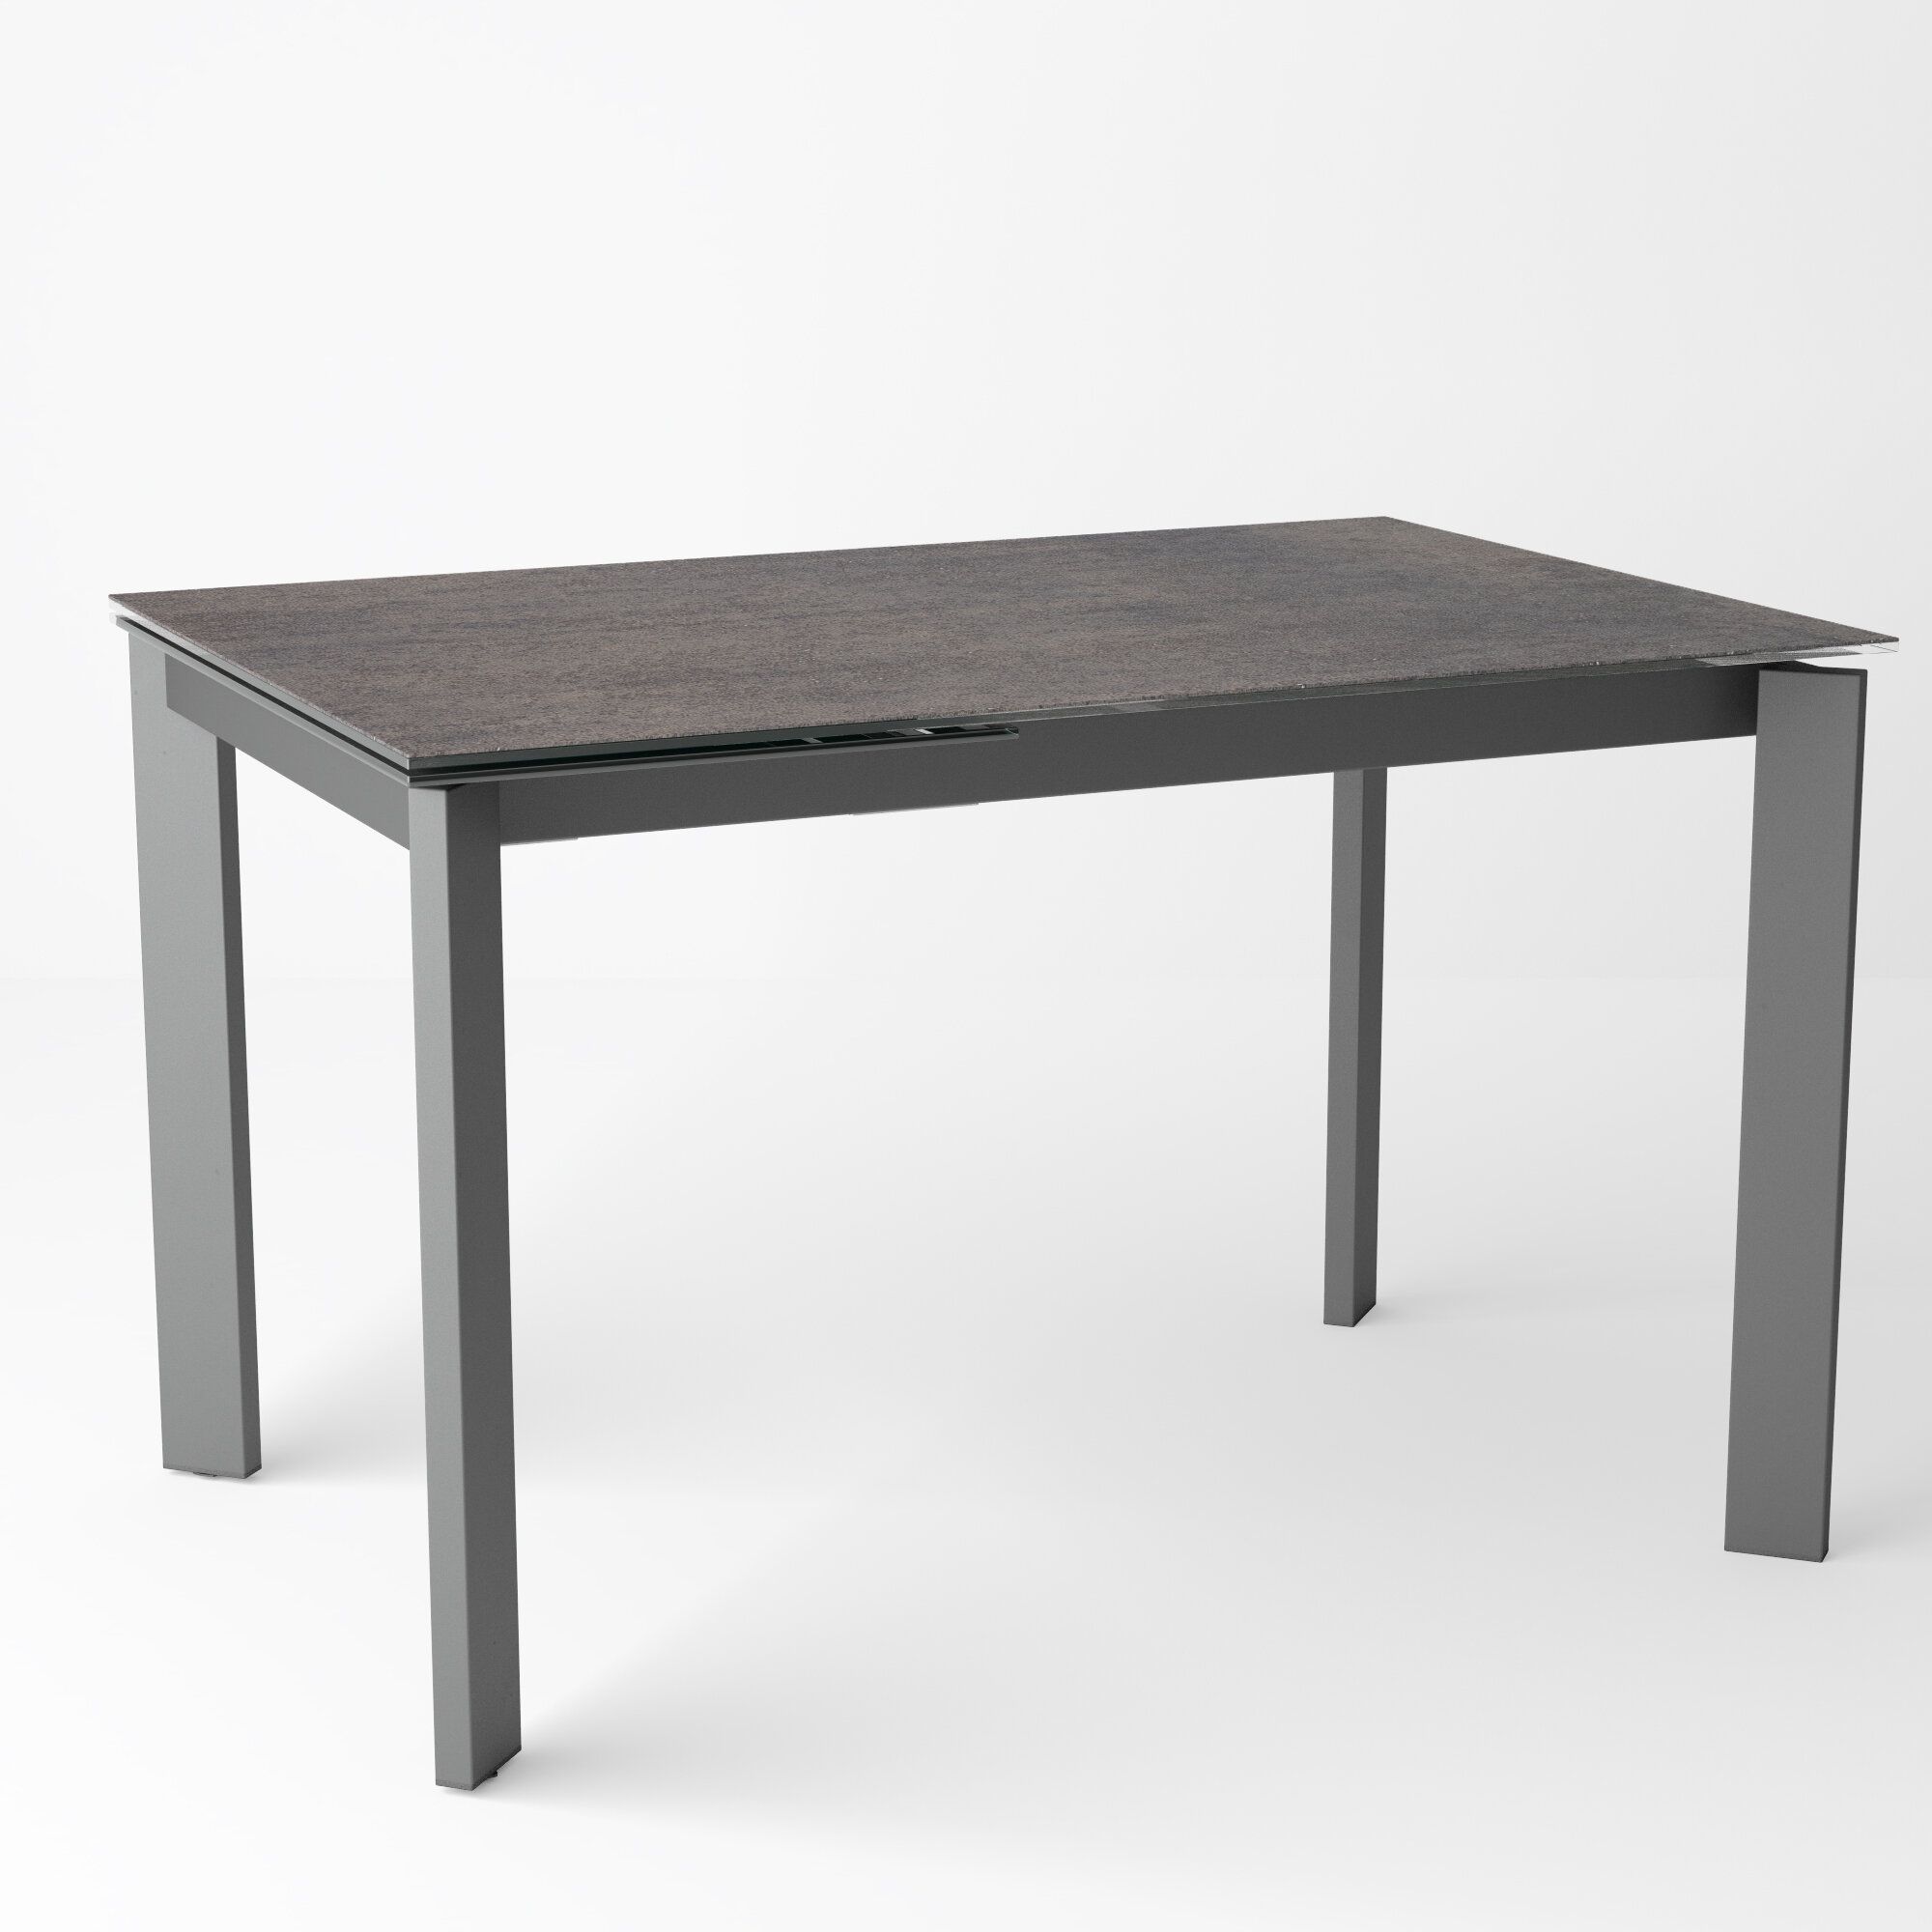 Fayean Extendable Dining Table Regarding Most Up To Date Faye Dining Tables (View 10 of 25)